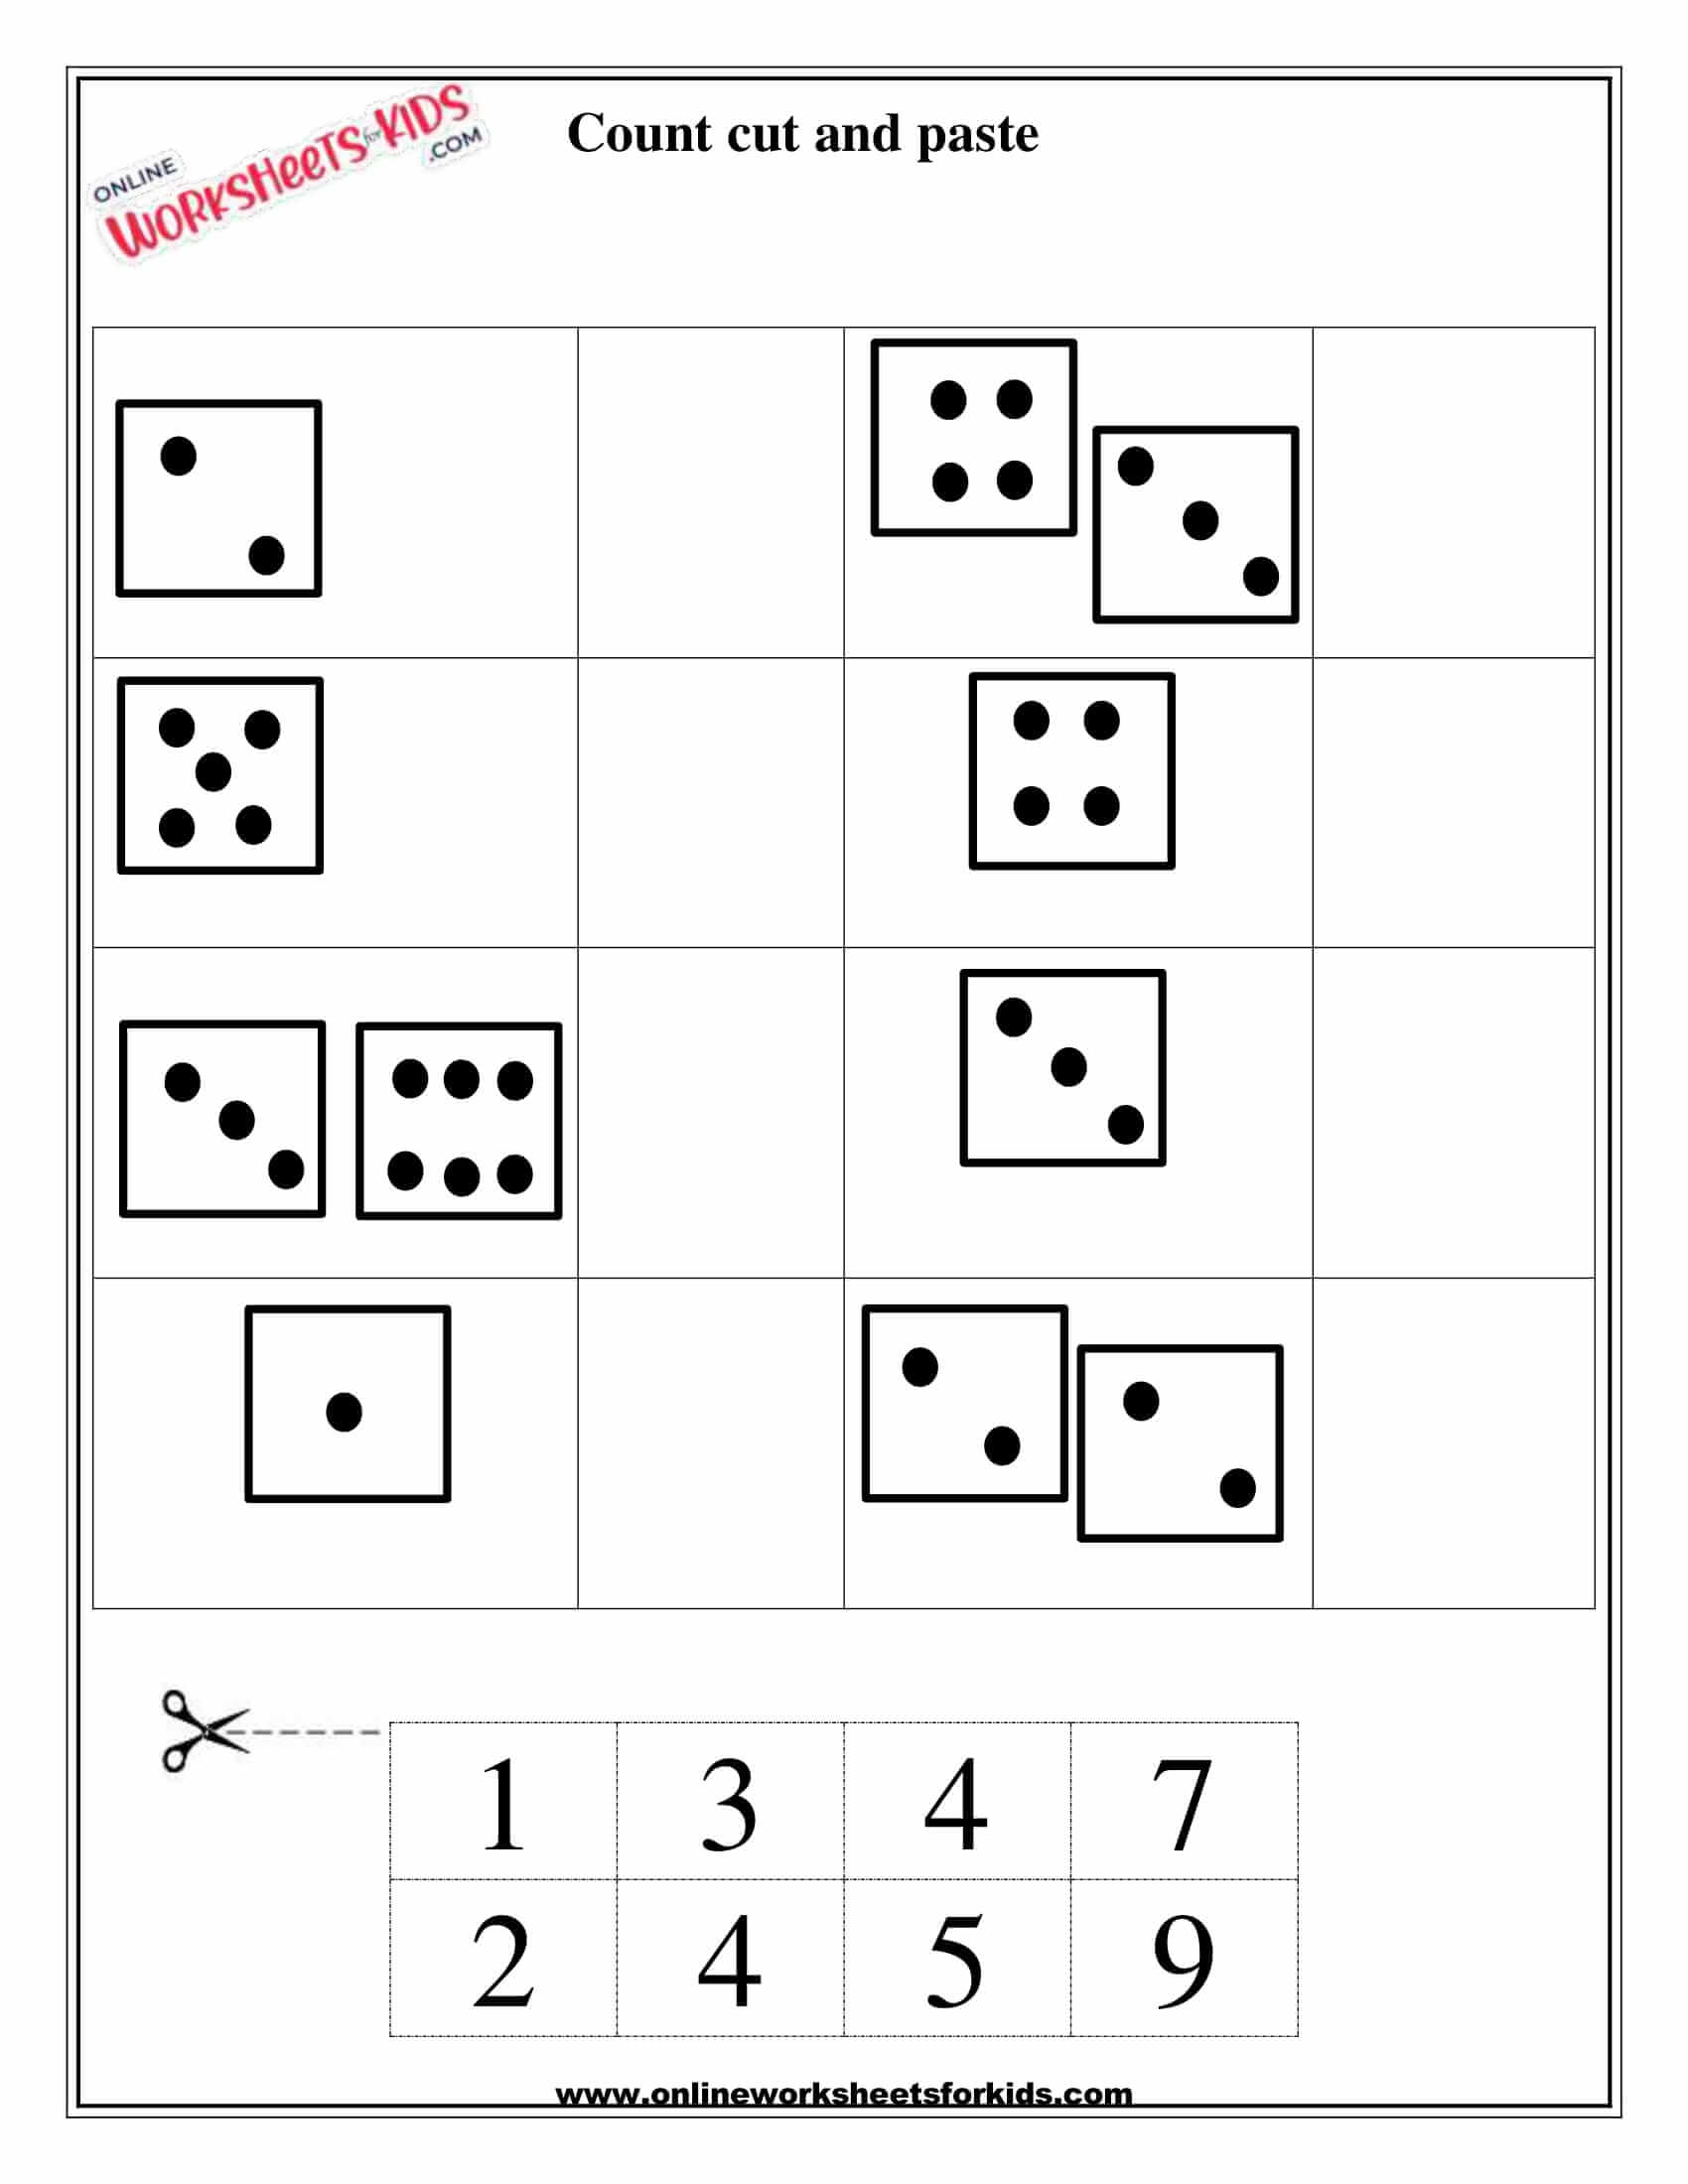 dice-counting-numbers-1-till-10-cut-and-paste-2